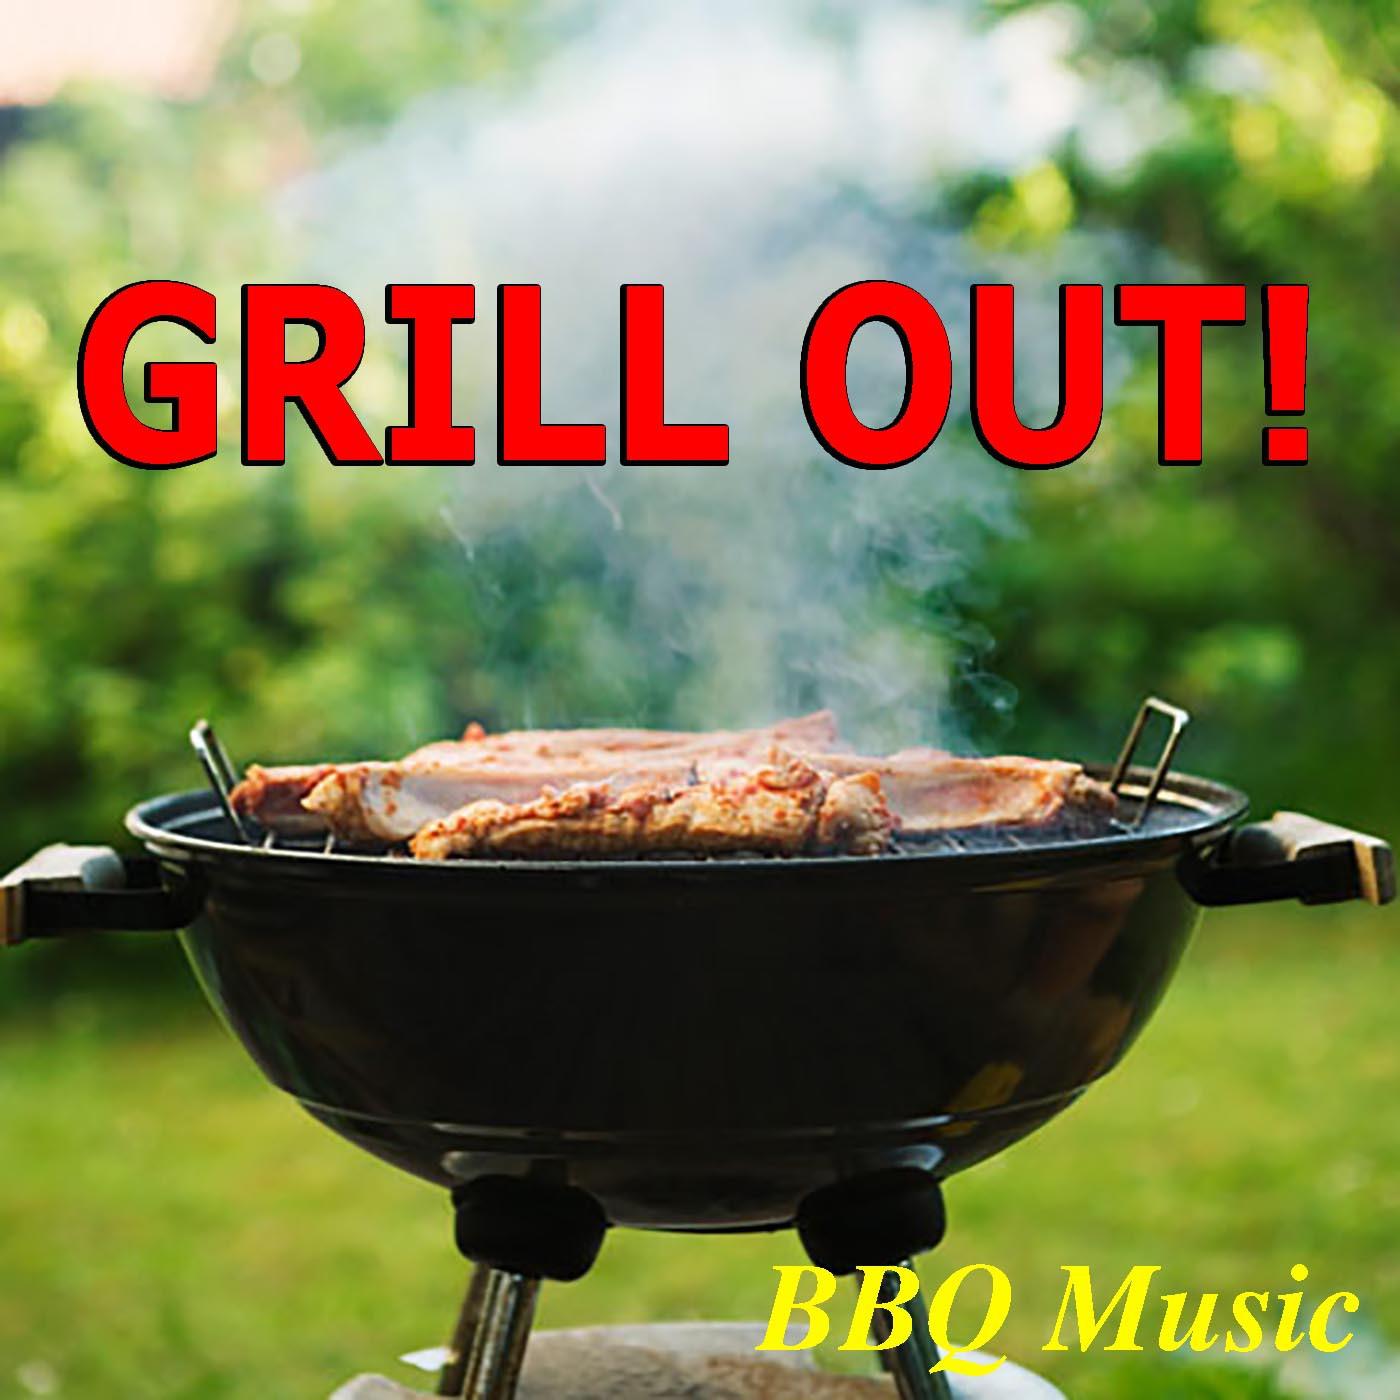 Grill Out! BBQ Music